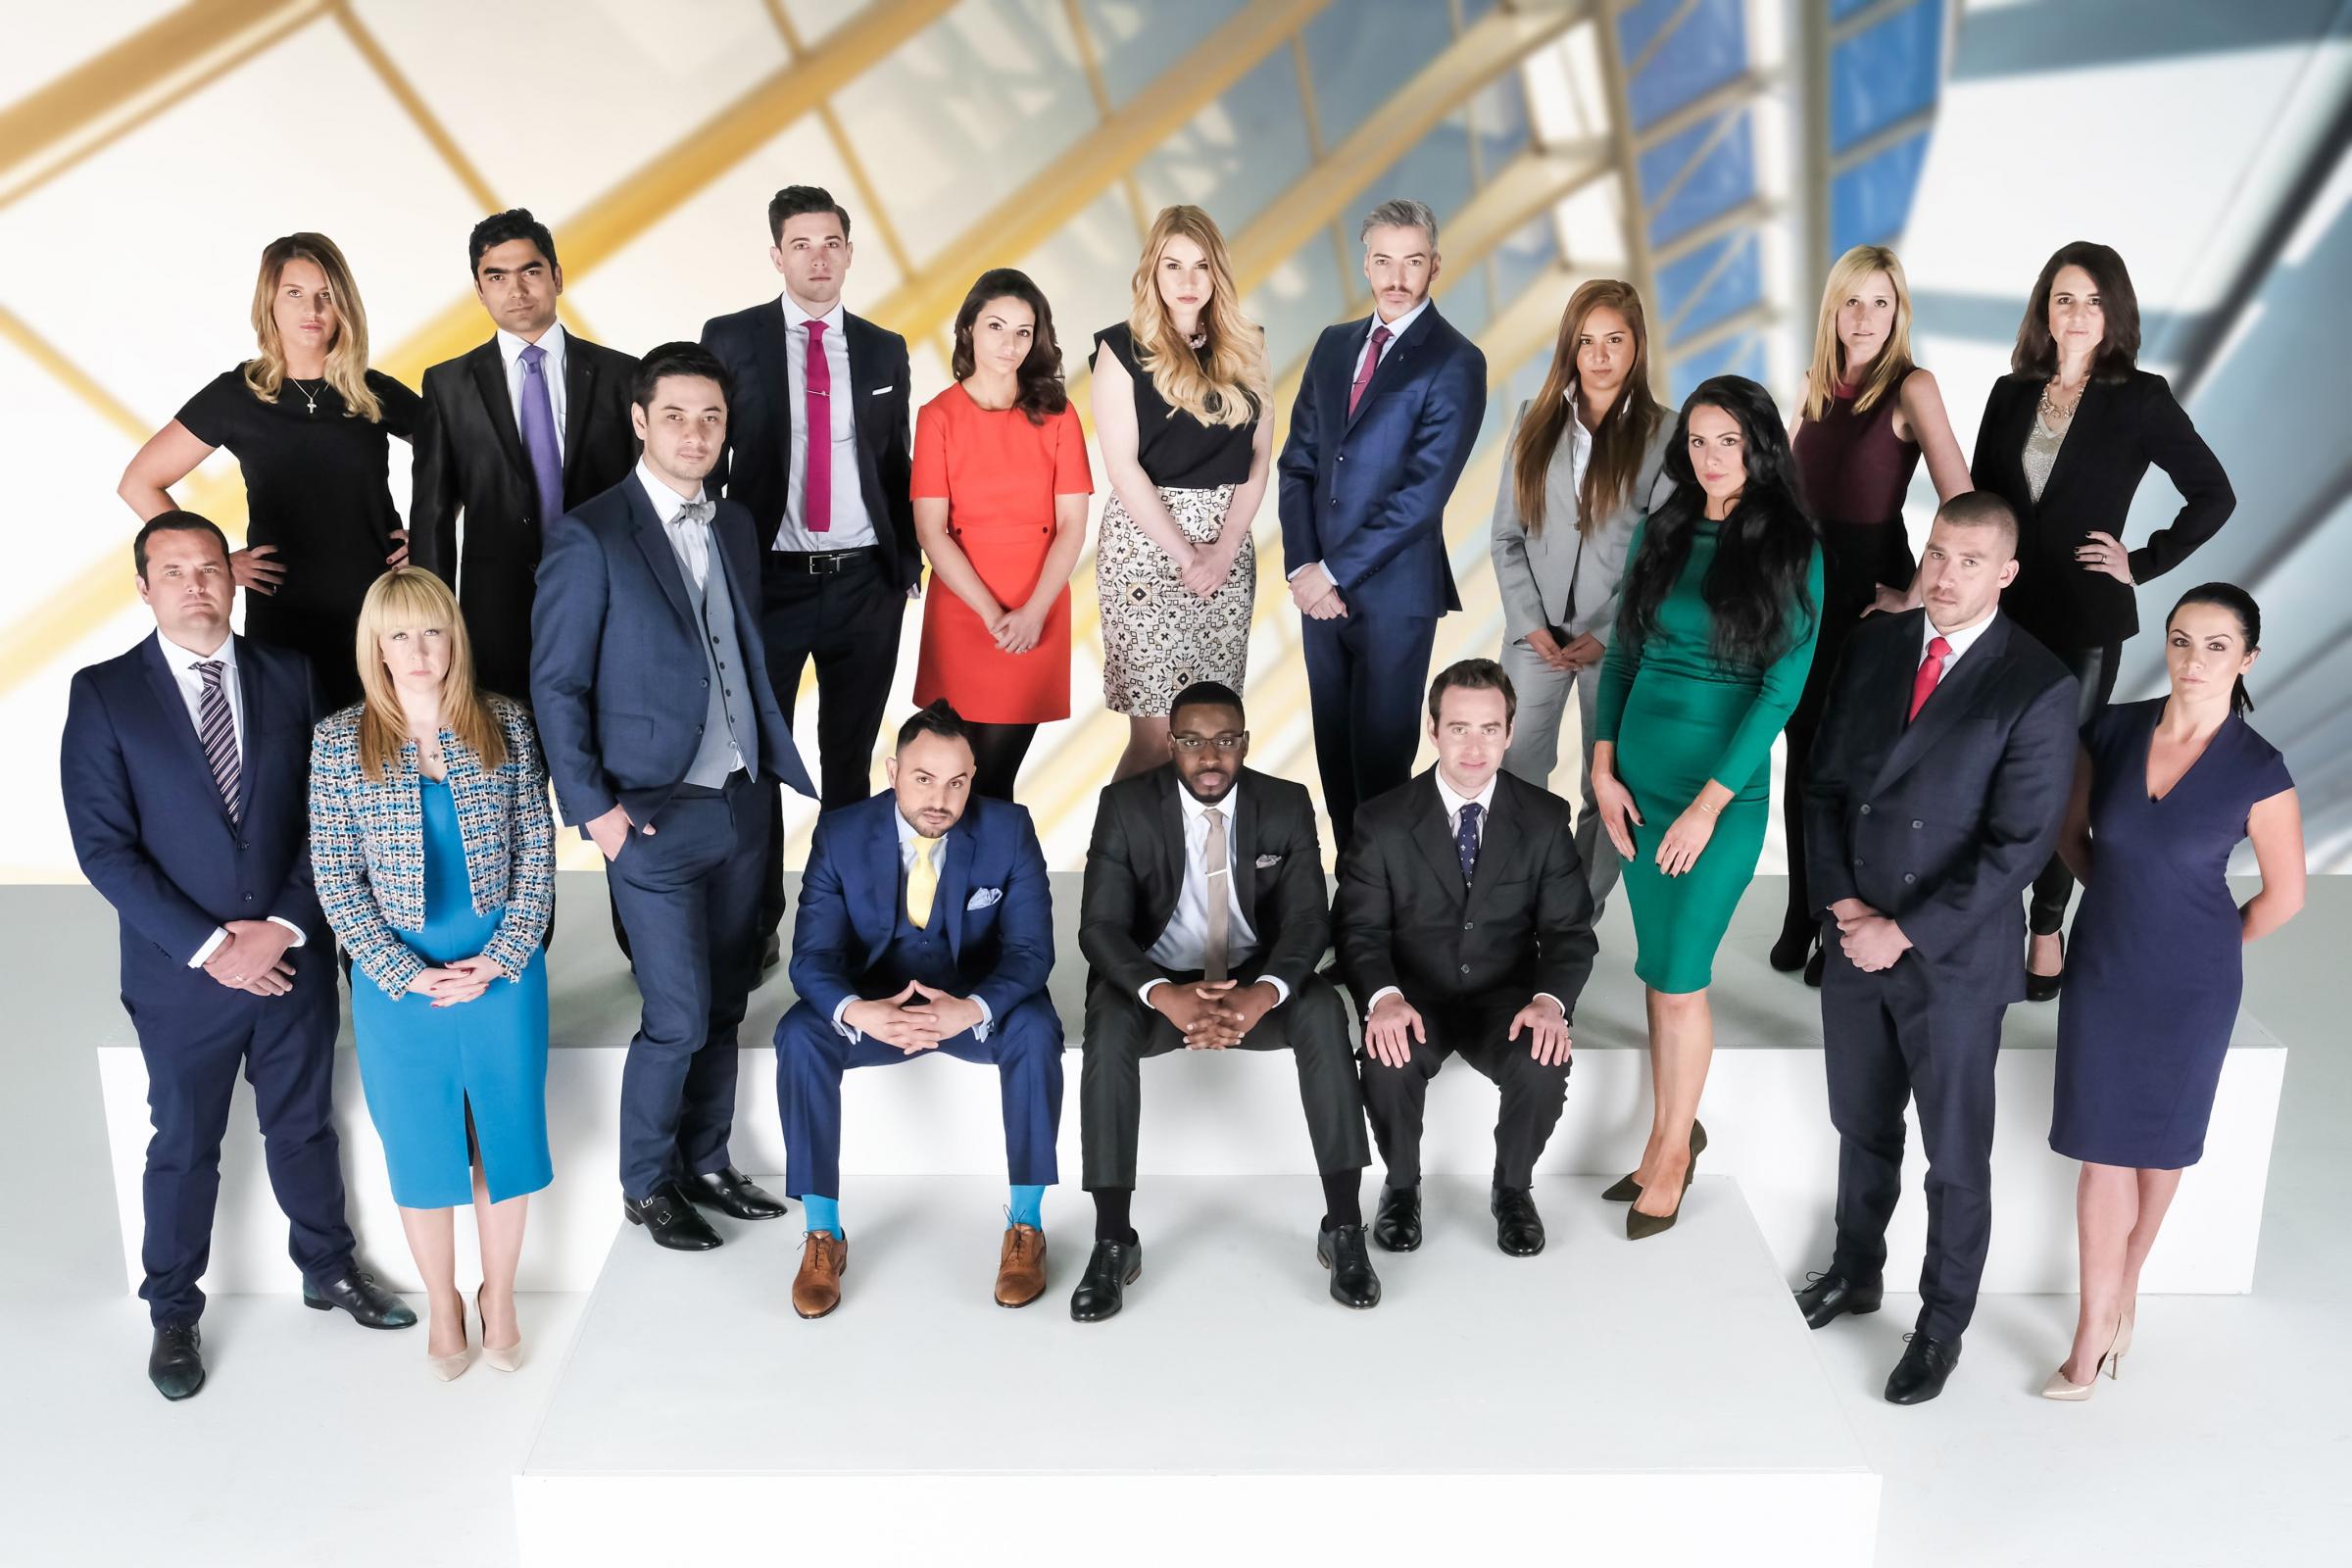 Apprentice candidates unleashed in Brighton tasked with selling sweets - The Argus